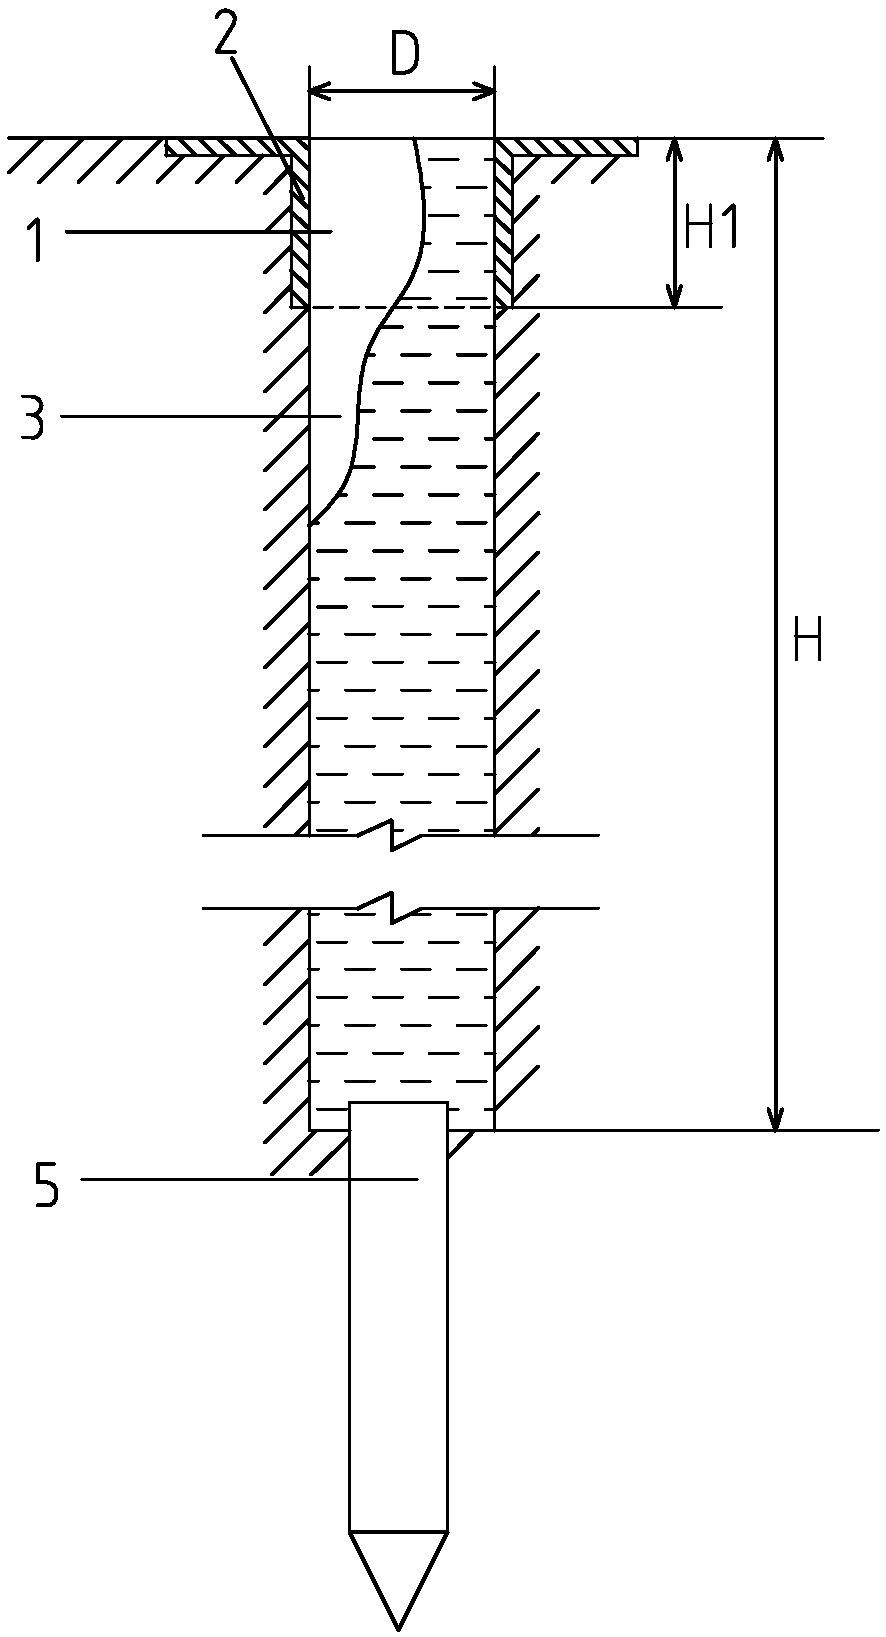 Original-soil and in-situ slurrying-based underground wall construction method